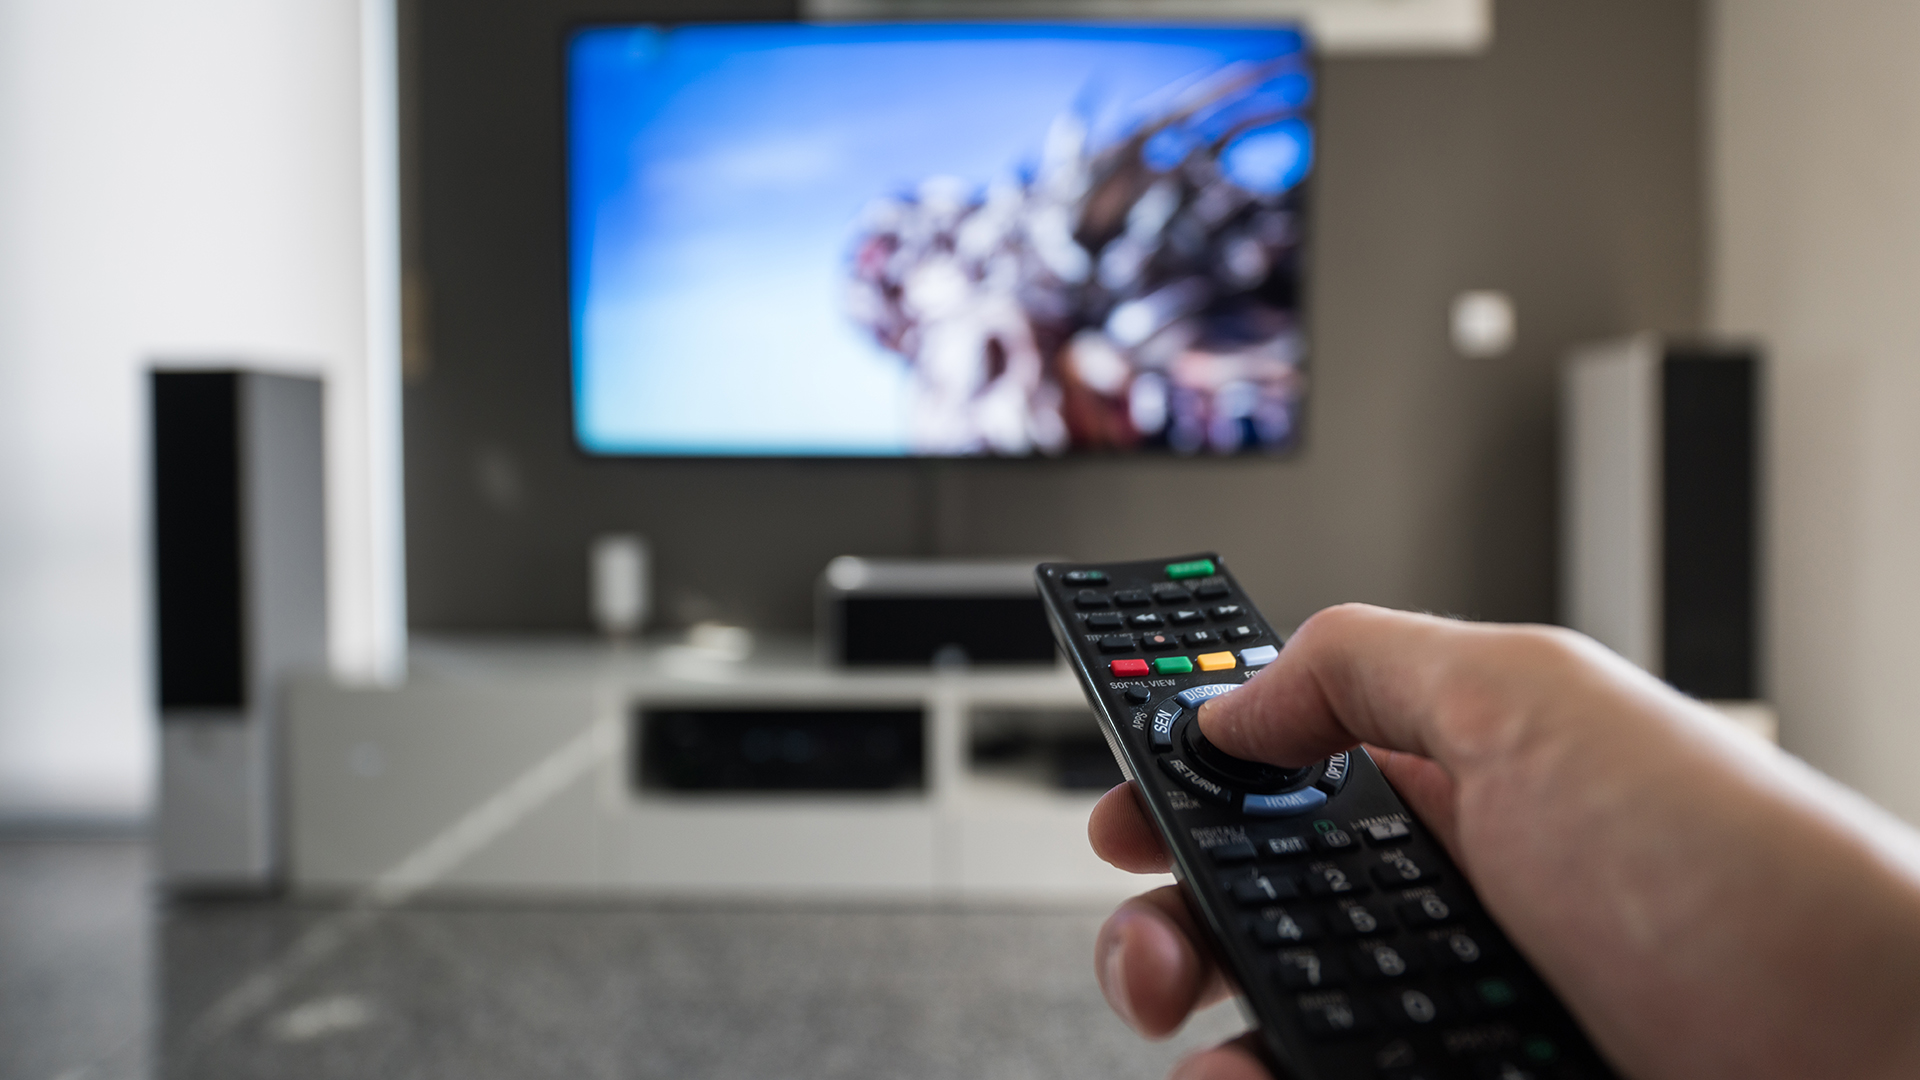 Can you use a universal remote for any TV?